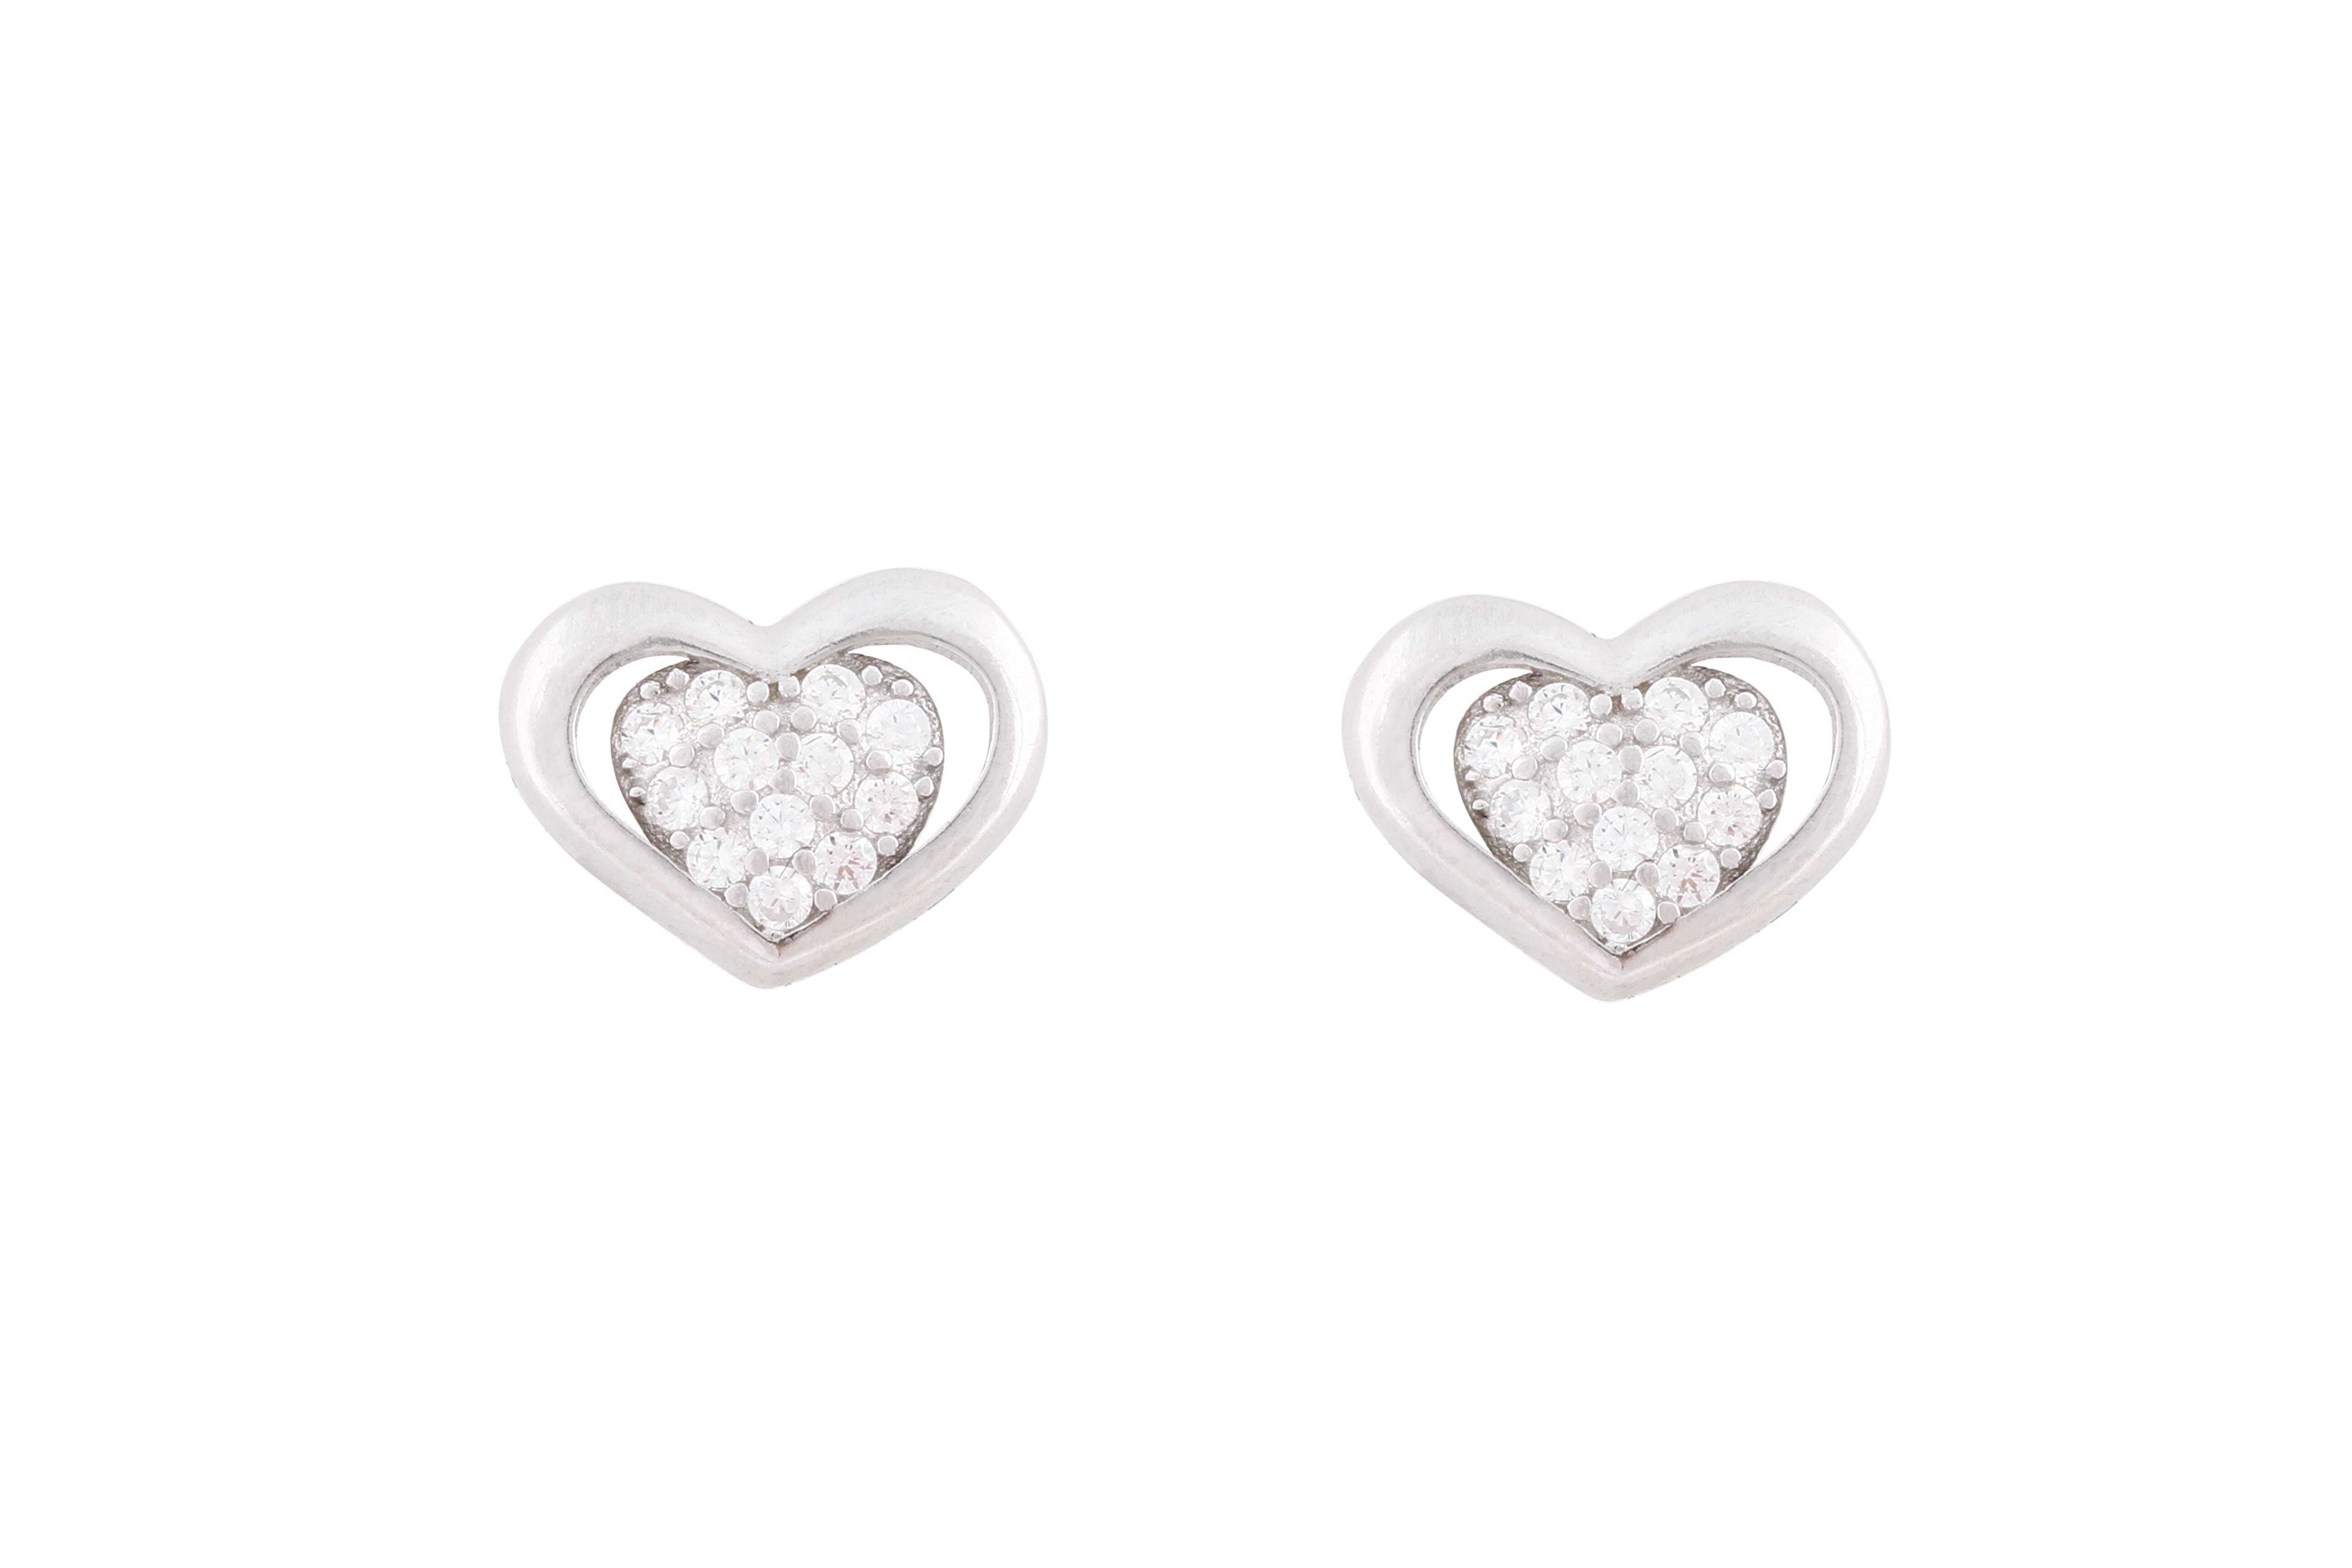 Asfour Crystal Stud Earring With  Heart  Design in 925 Sterling Silver ER0383